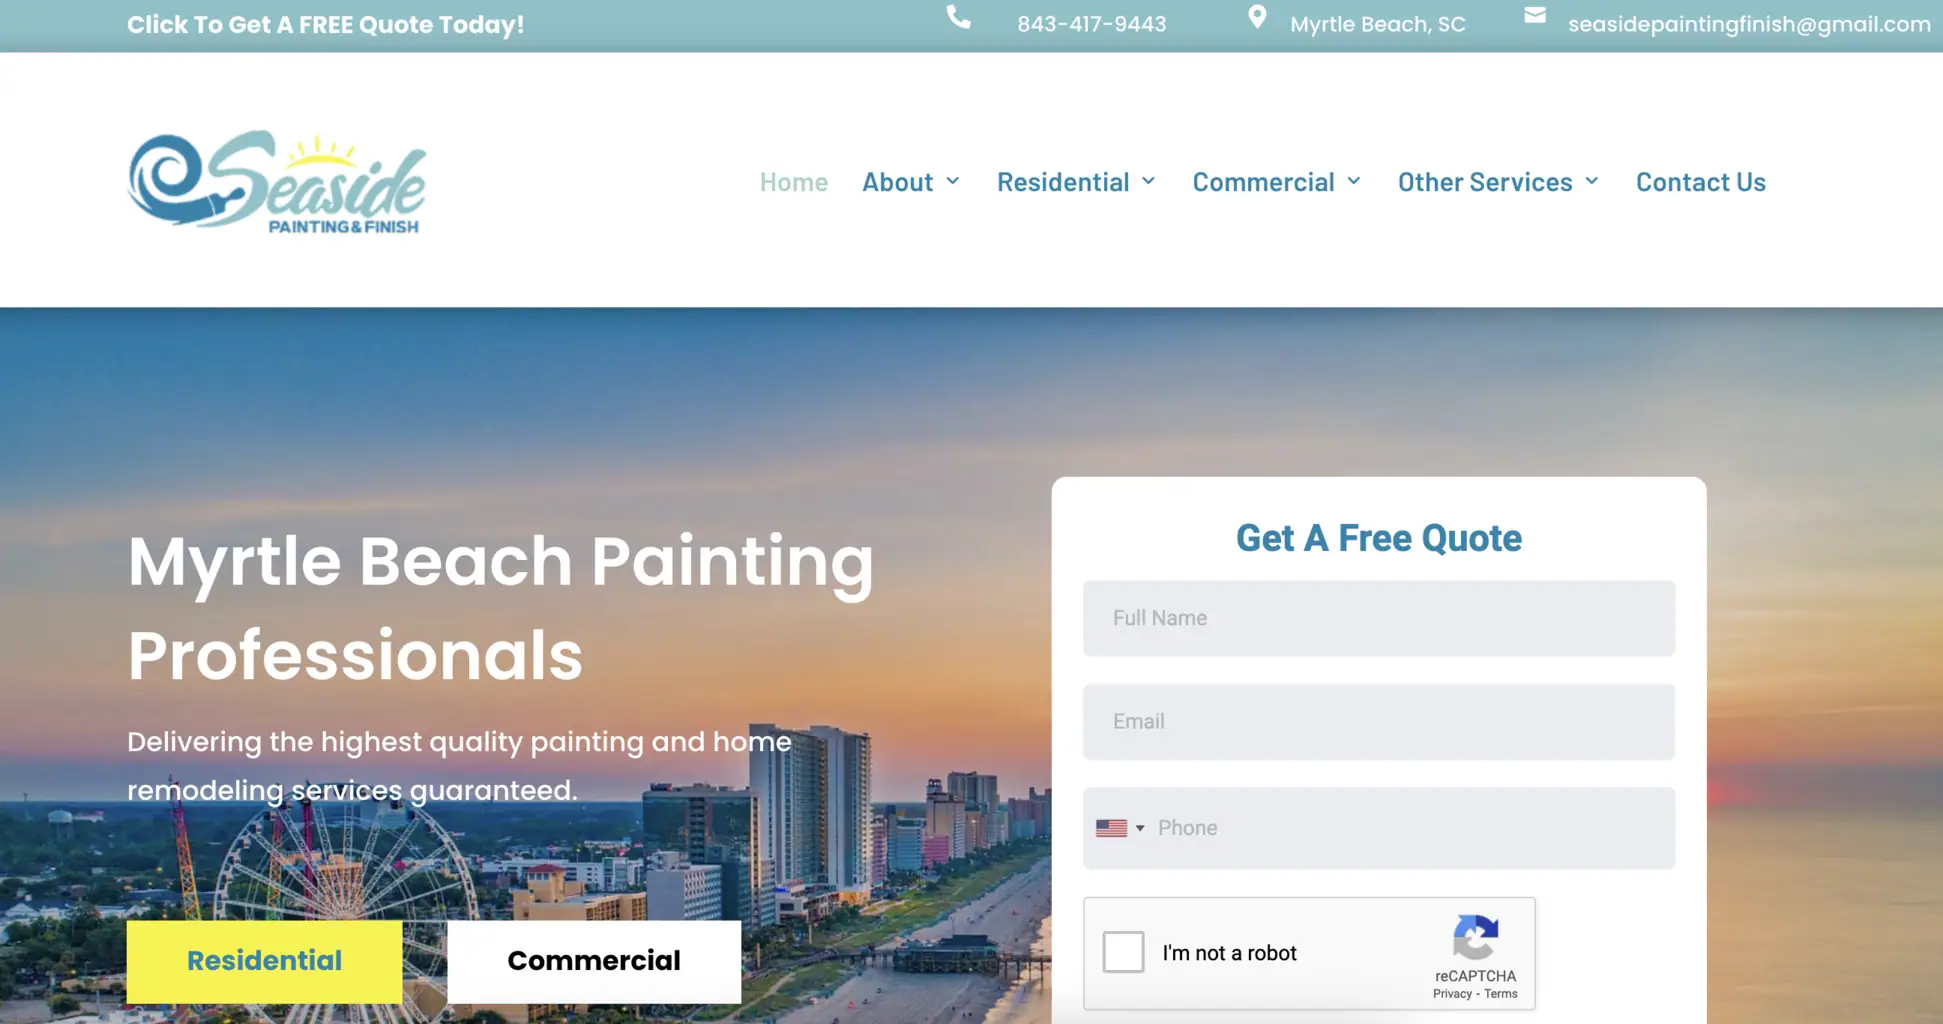 Seaside Painting Finish website design by business all in one marketing solutions